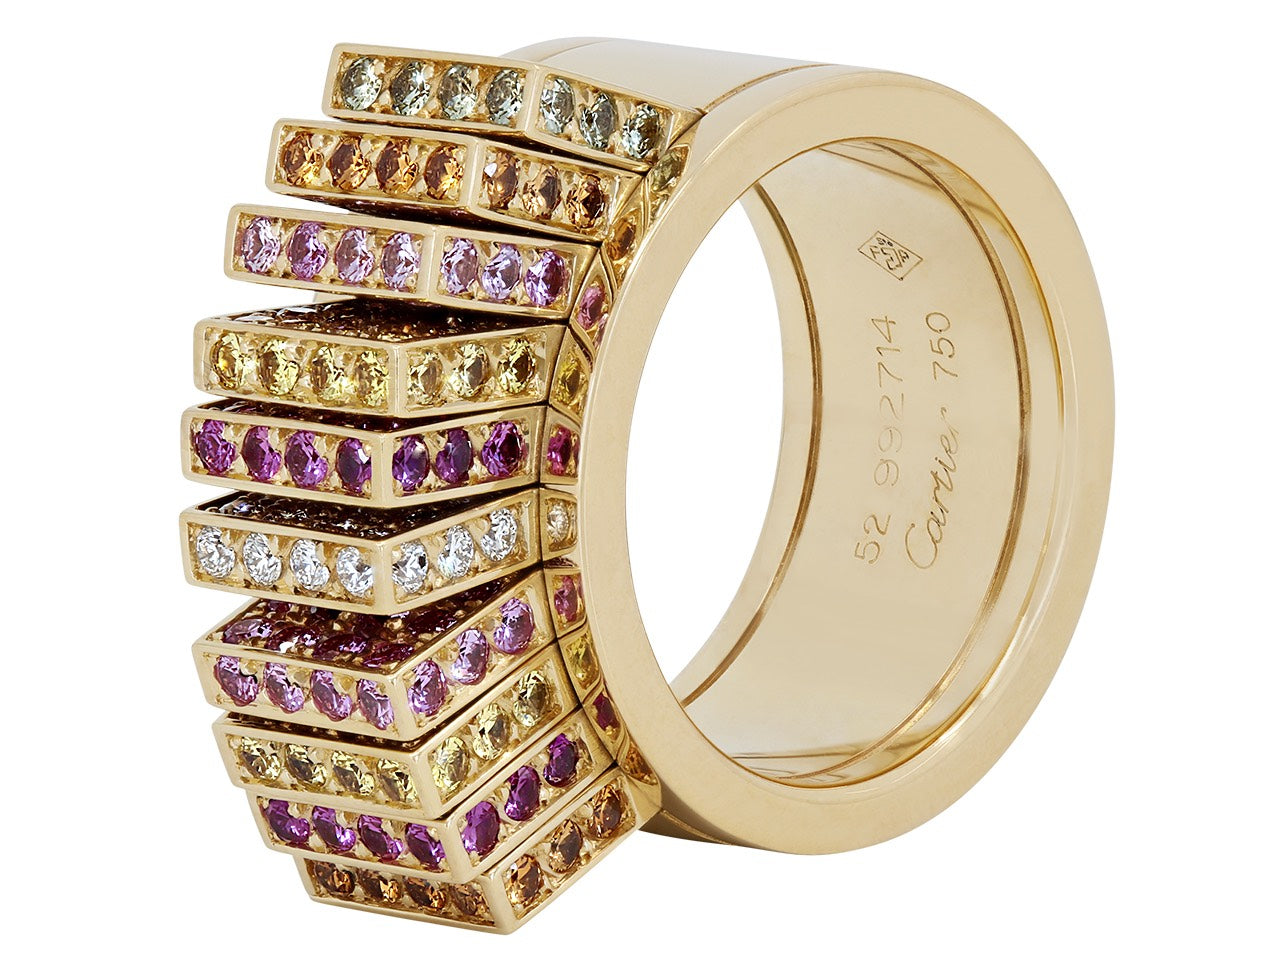 Cartier 'Collection Délices de Cartier' Sapphire and Diamond Fan Ring in 18K Gold